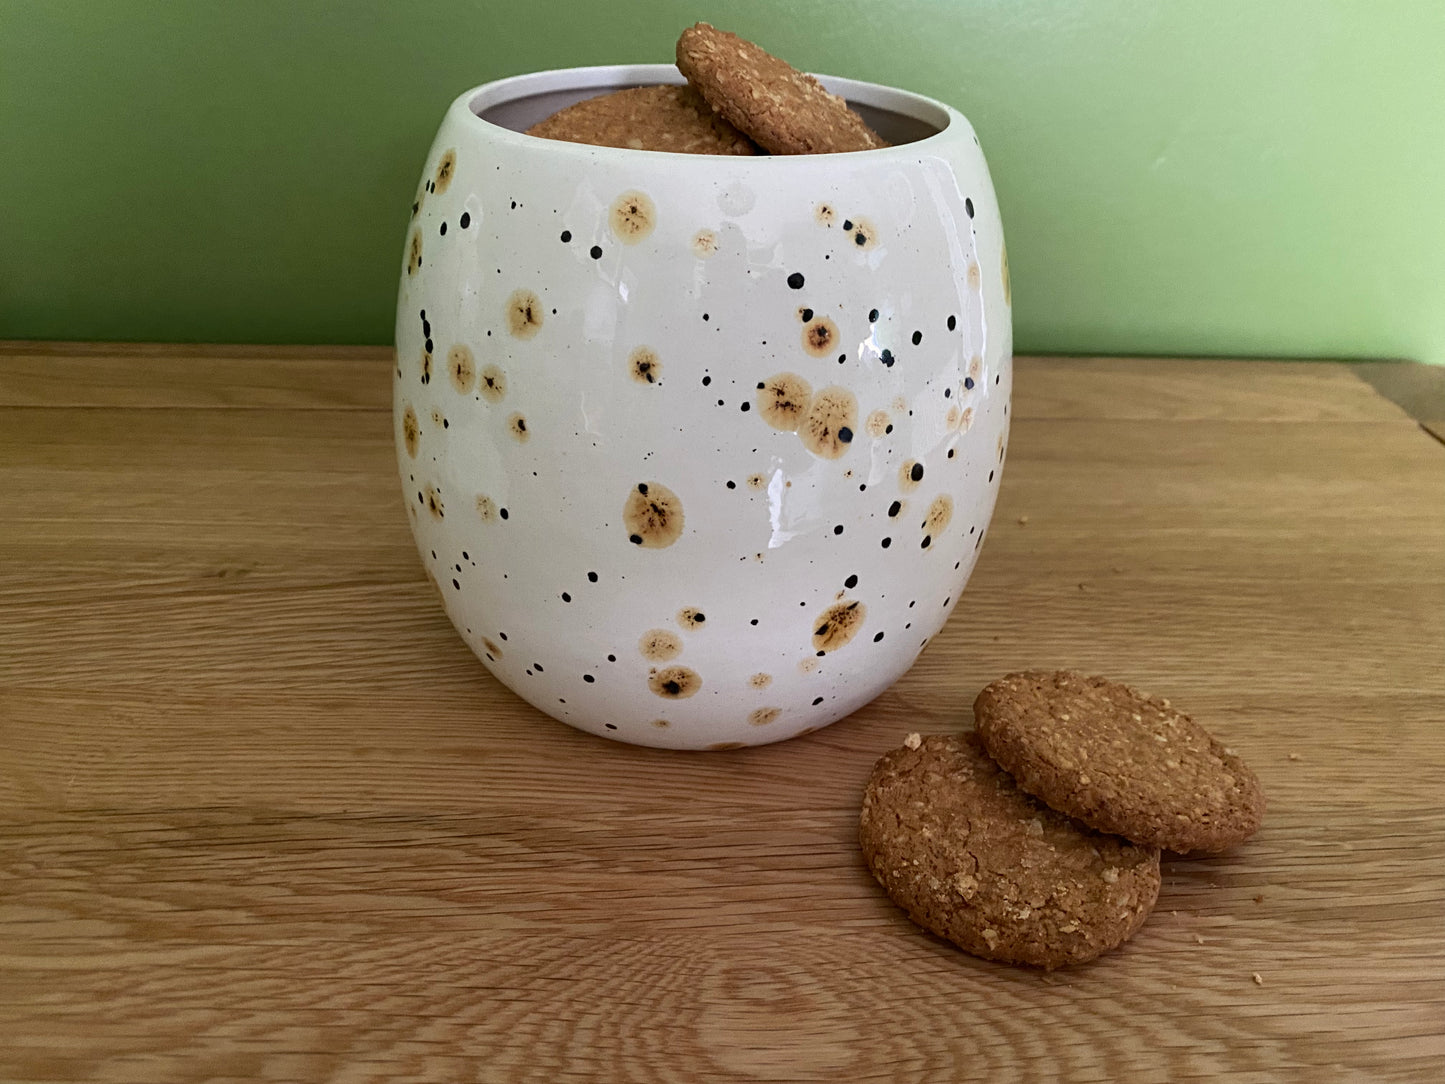 Cookie/Biscuit Jar Canister Confetti Glaze